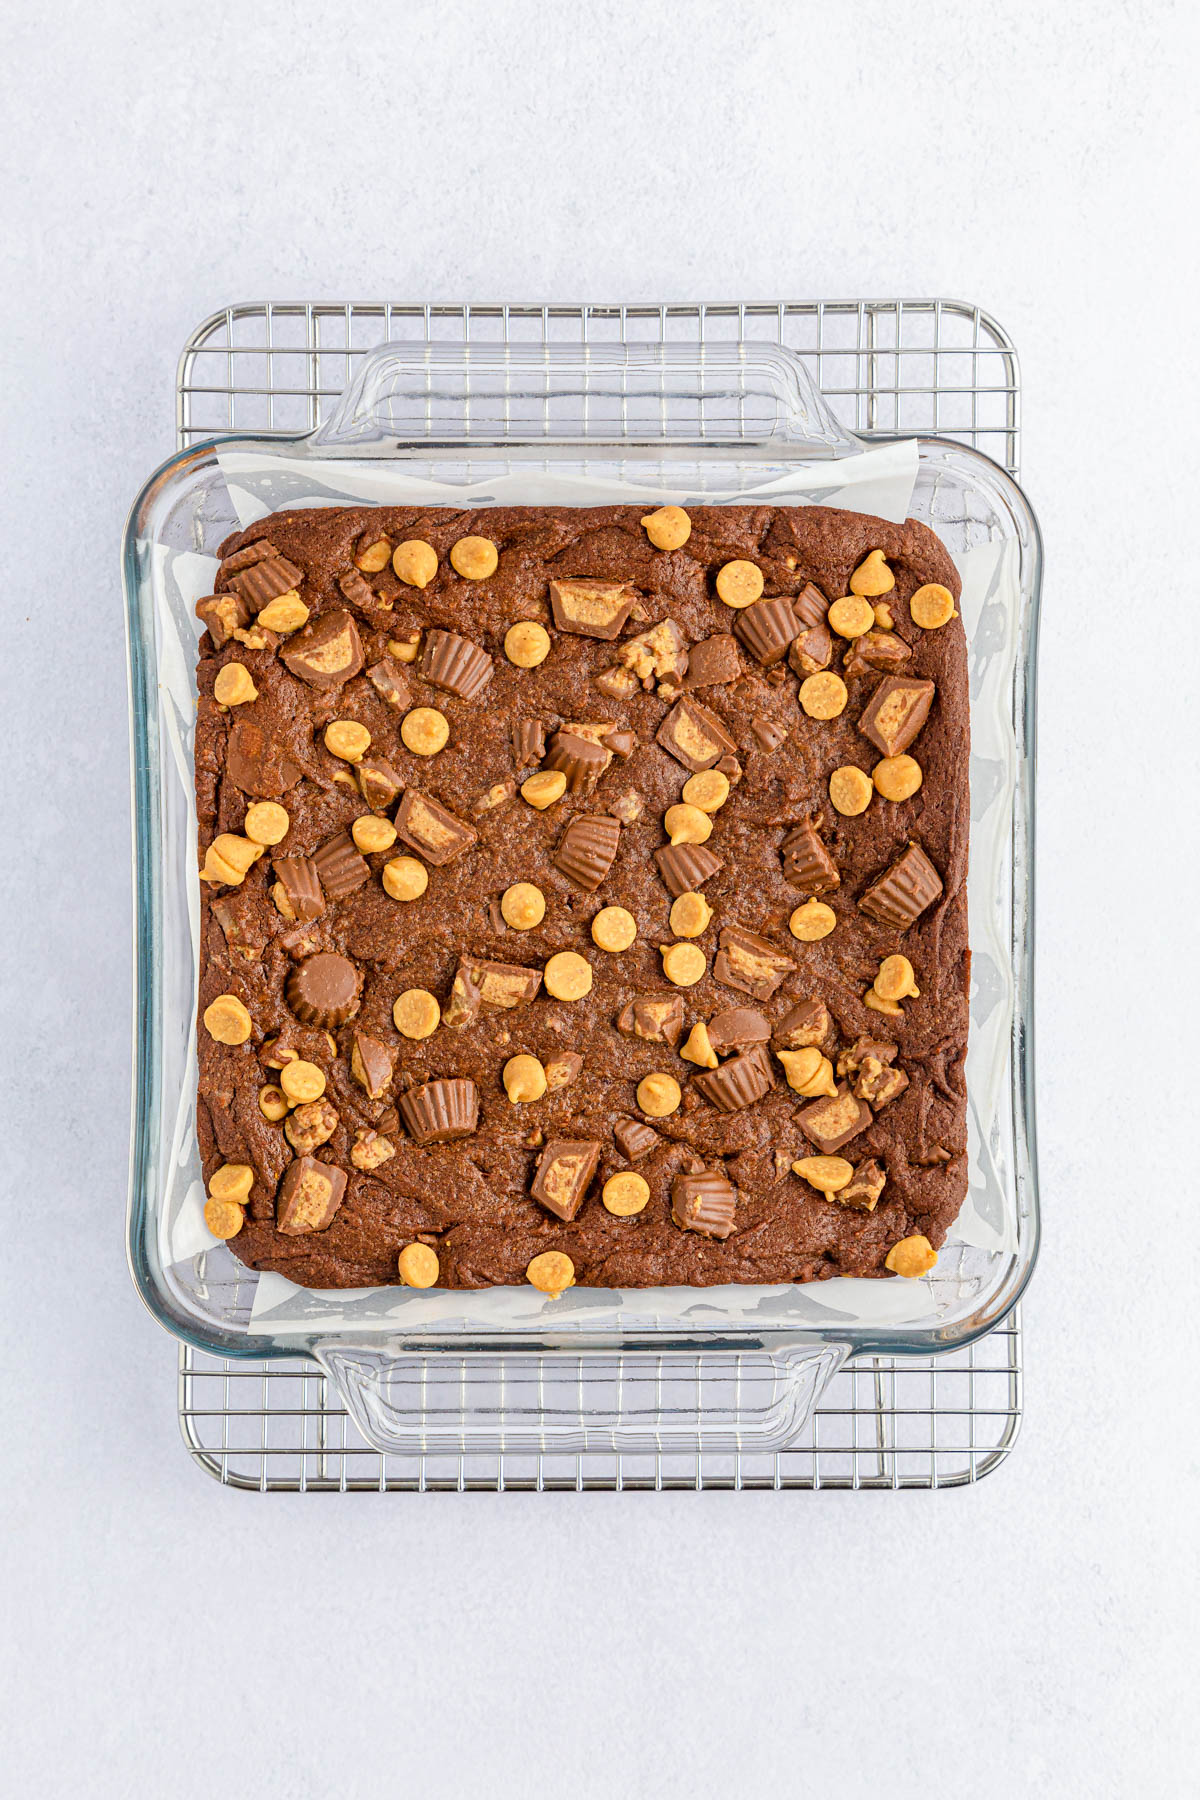 Baked Reese's brownies on cooling rack